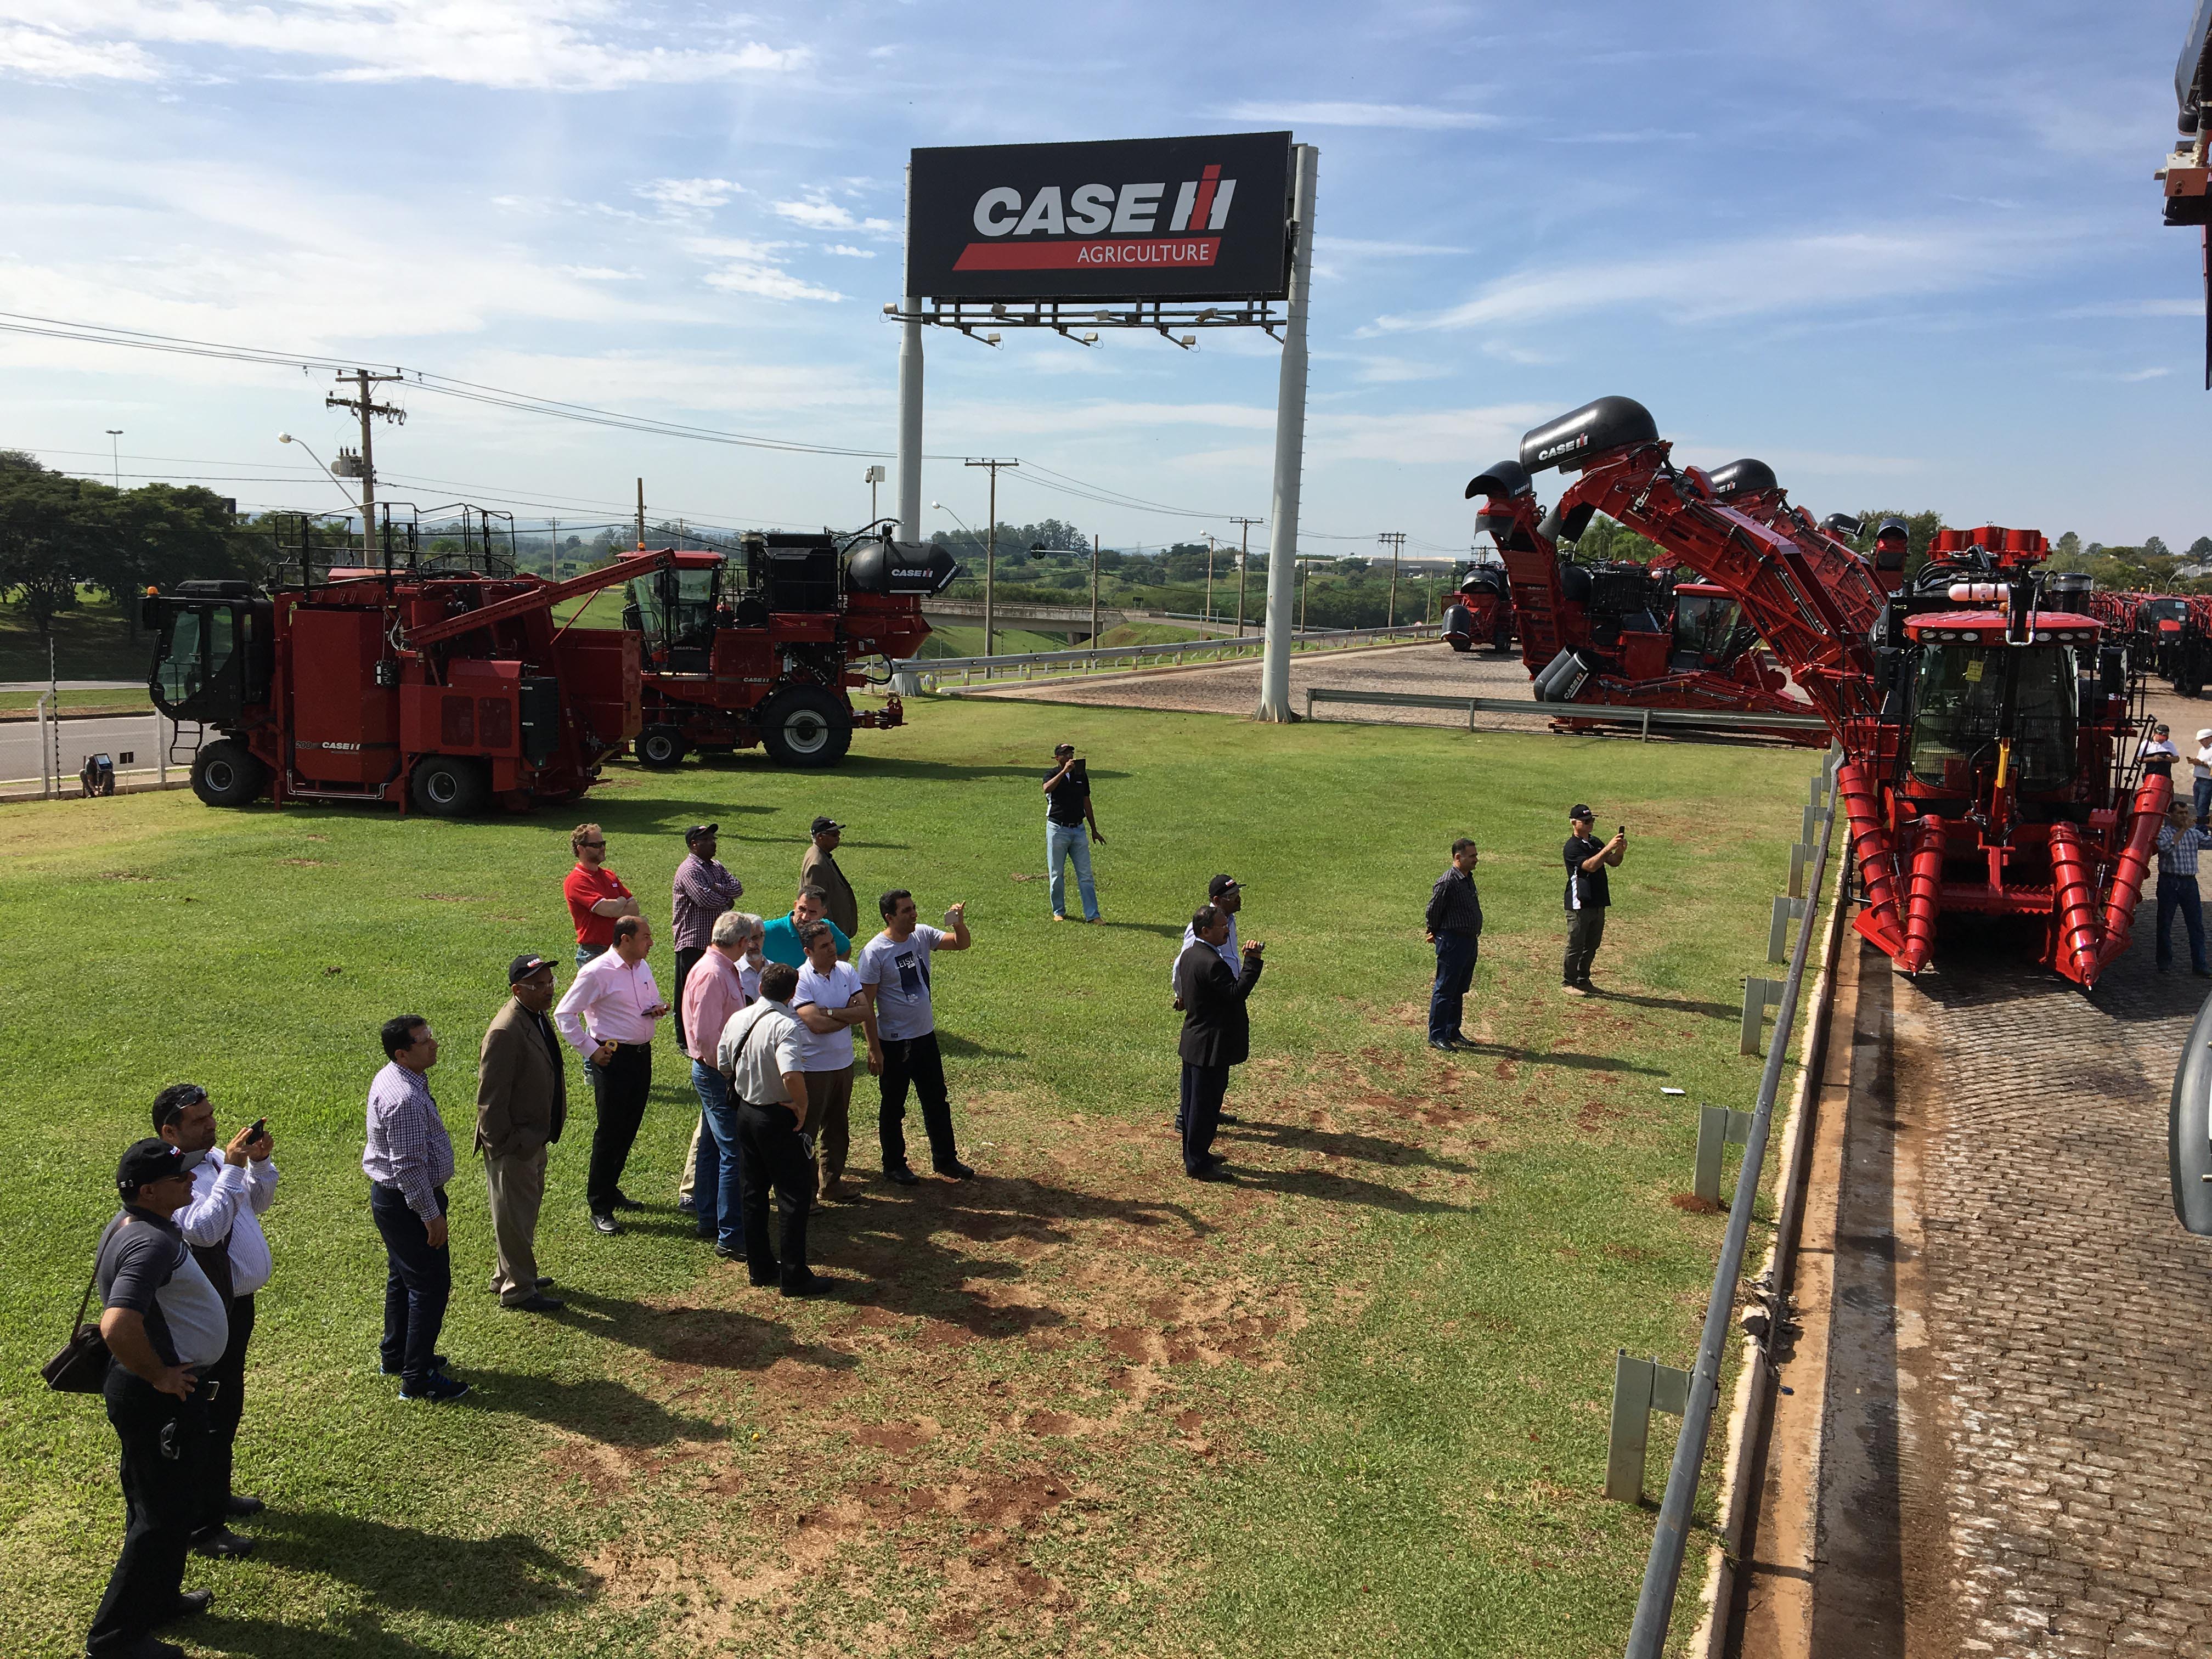 CASE IH SUGAR CAMP 2017 GIVES INSIGHTS INTO THE WORLDS LARGEST SUGARCANE PRODUCER